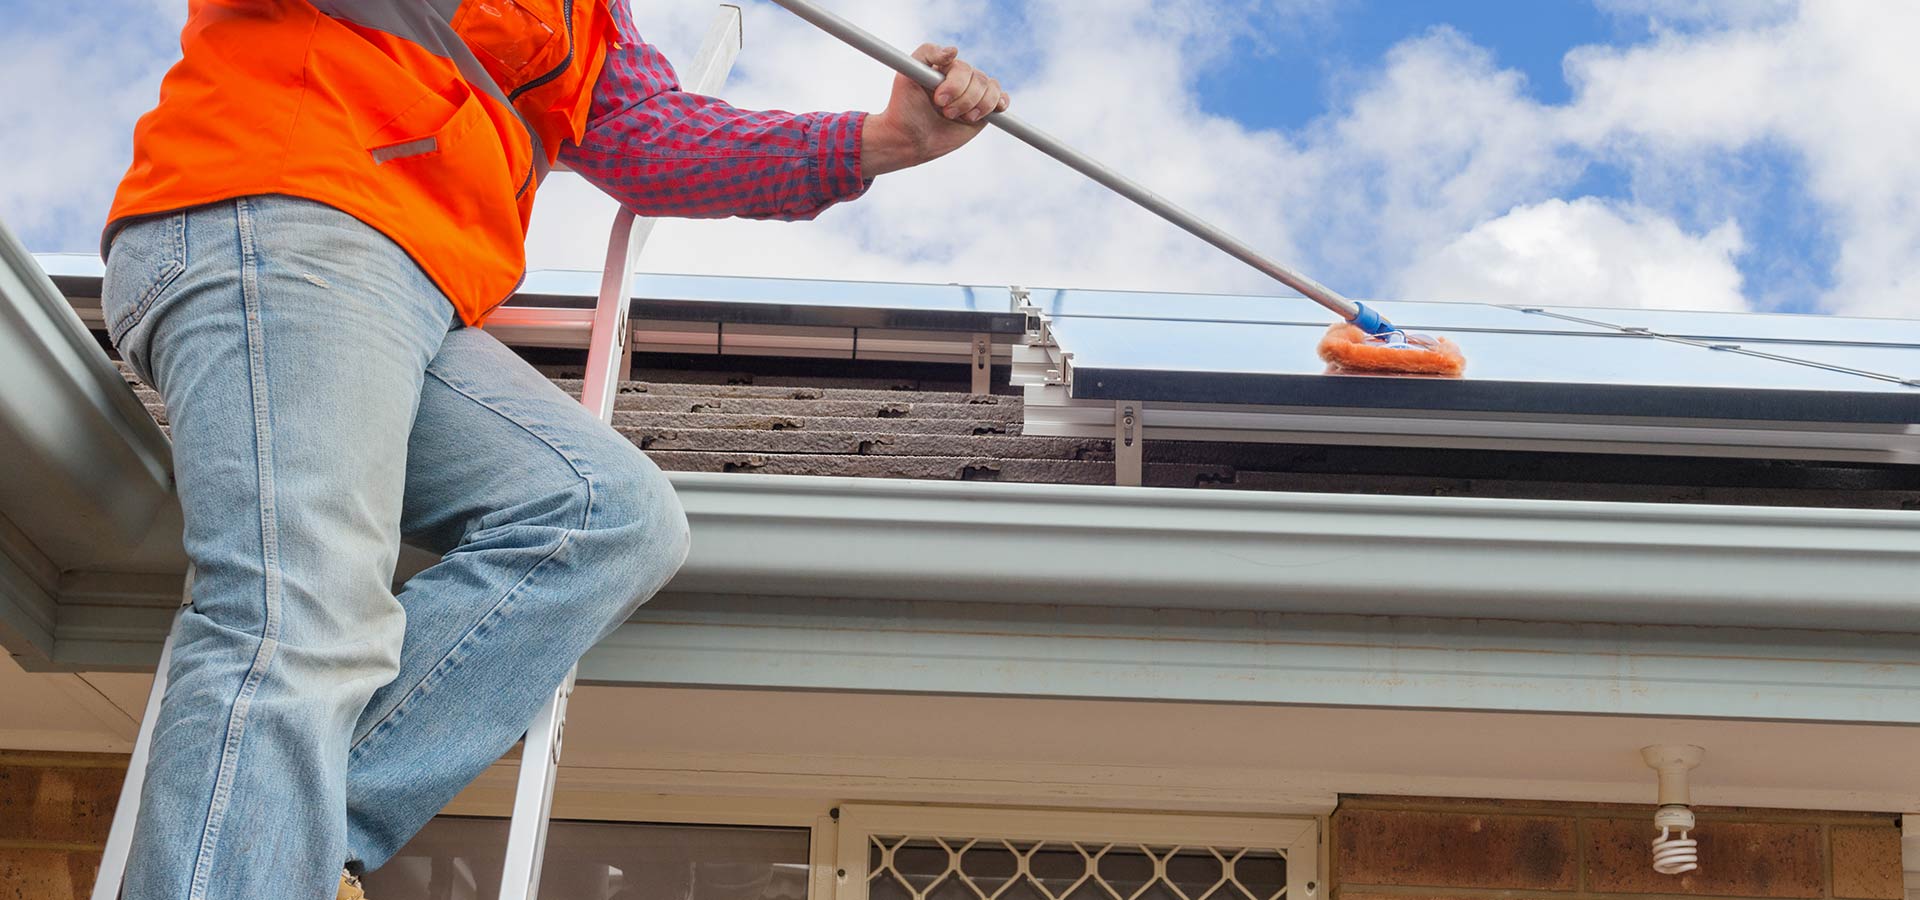 WINDOW & SOLAR PANEL CLEANING SERVICES IN WAGGA WAGGA